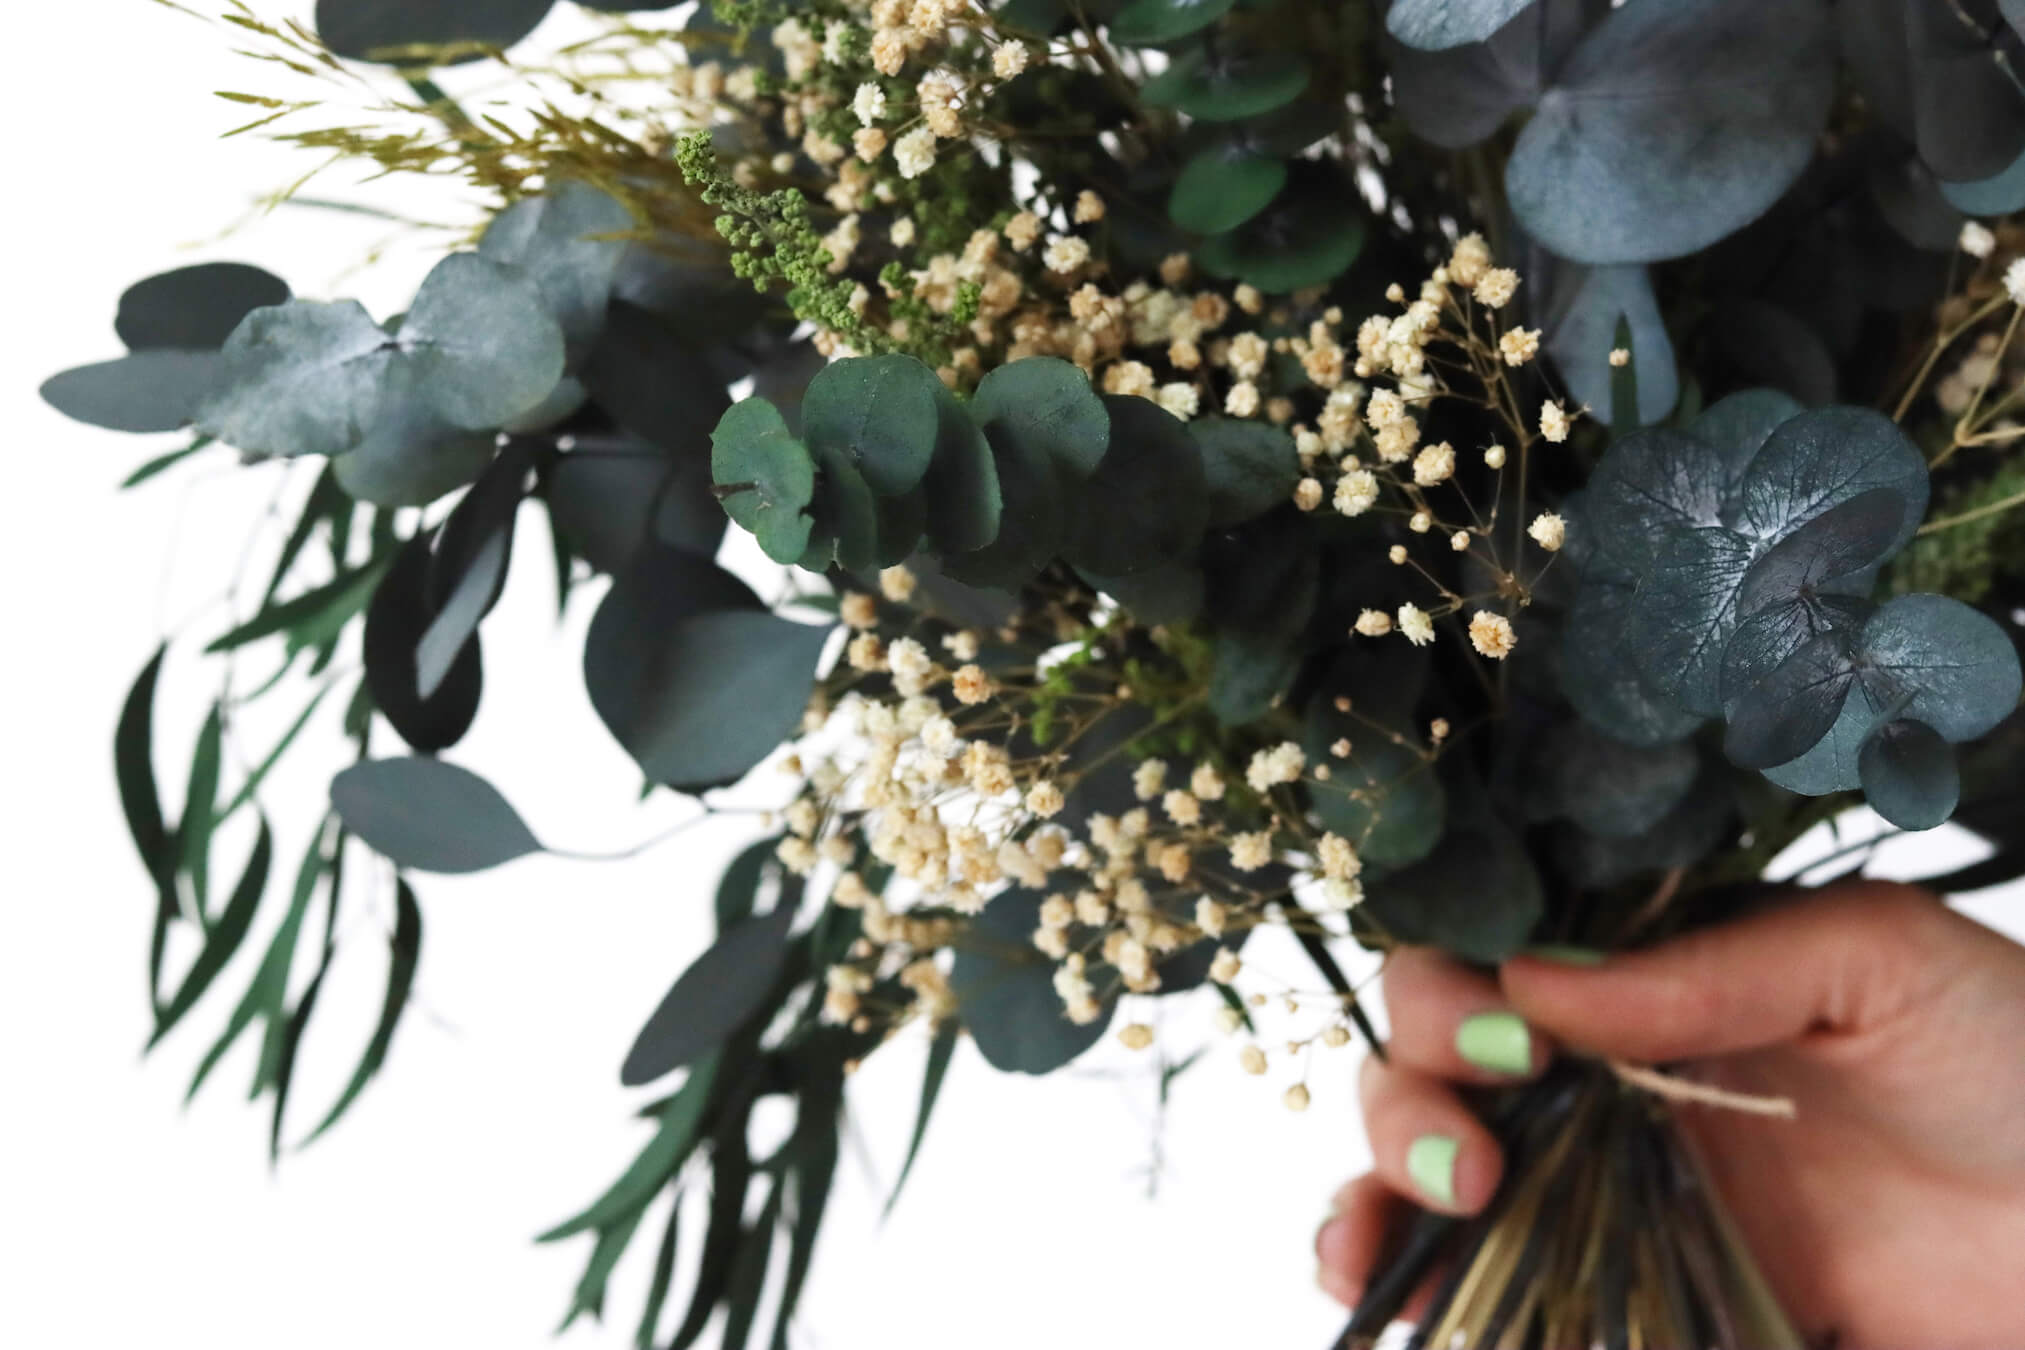 Stems Natural Dry Flowers Eucalyptus Daisy Decorative Dried Flowers Mini  Floral Crafts Bouquet for Wedding